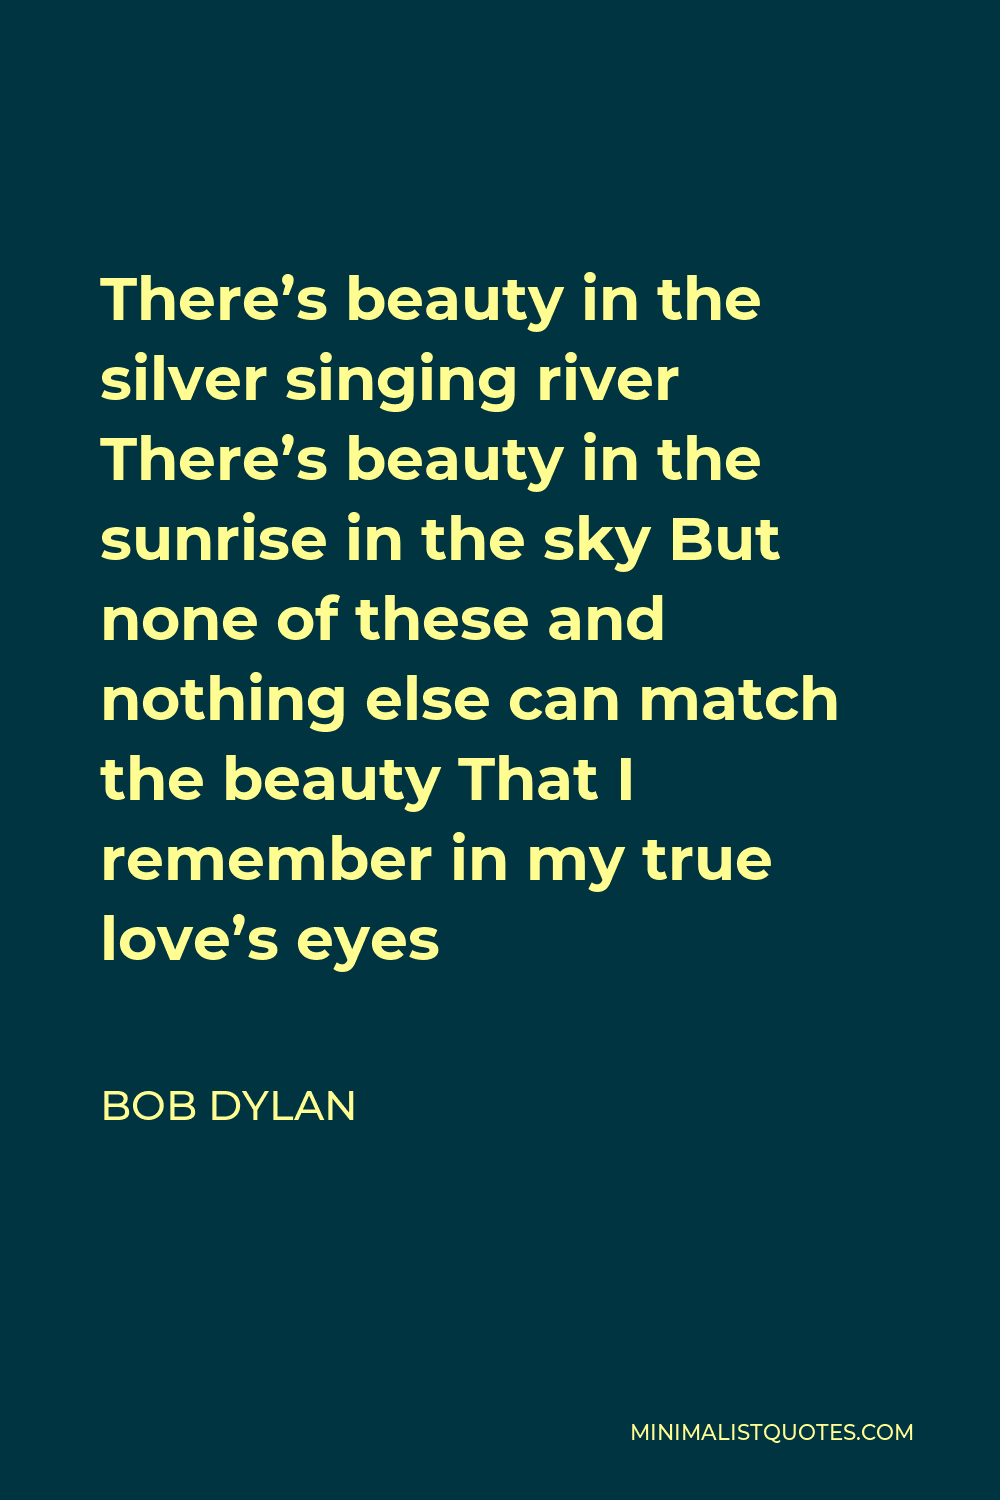 Bob Dylan Quote - There’s beauty in the silver singing river There’s beauty in the sunrise in the sky But none of these and nothing else can match the beauty That I remember in my true love’s eyes